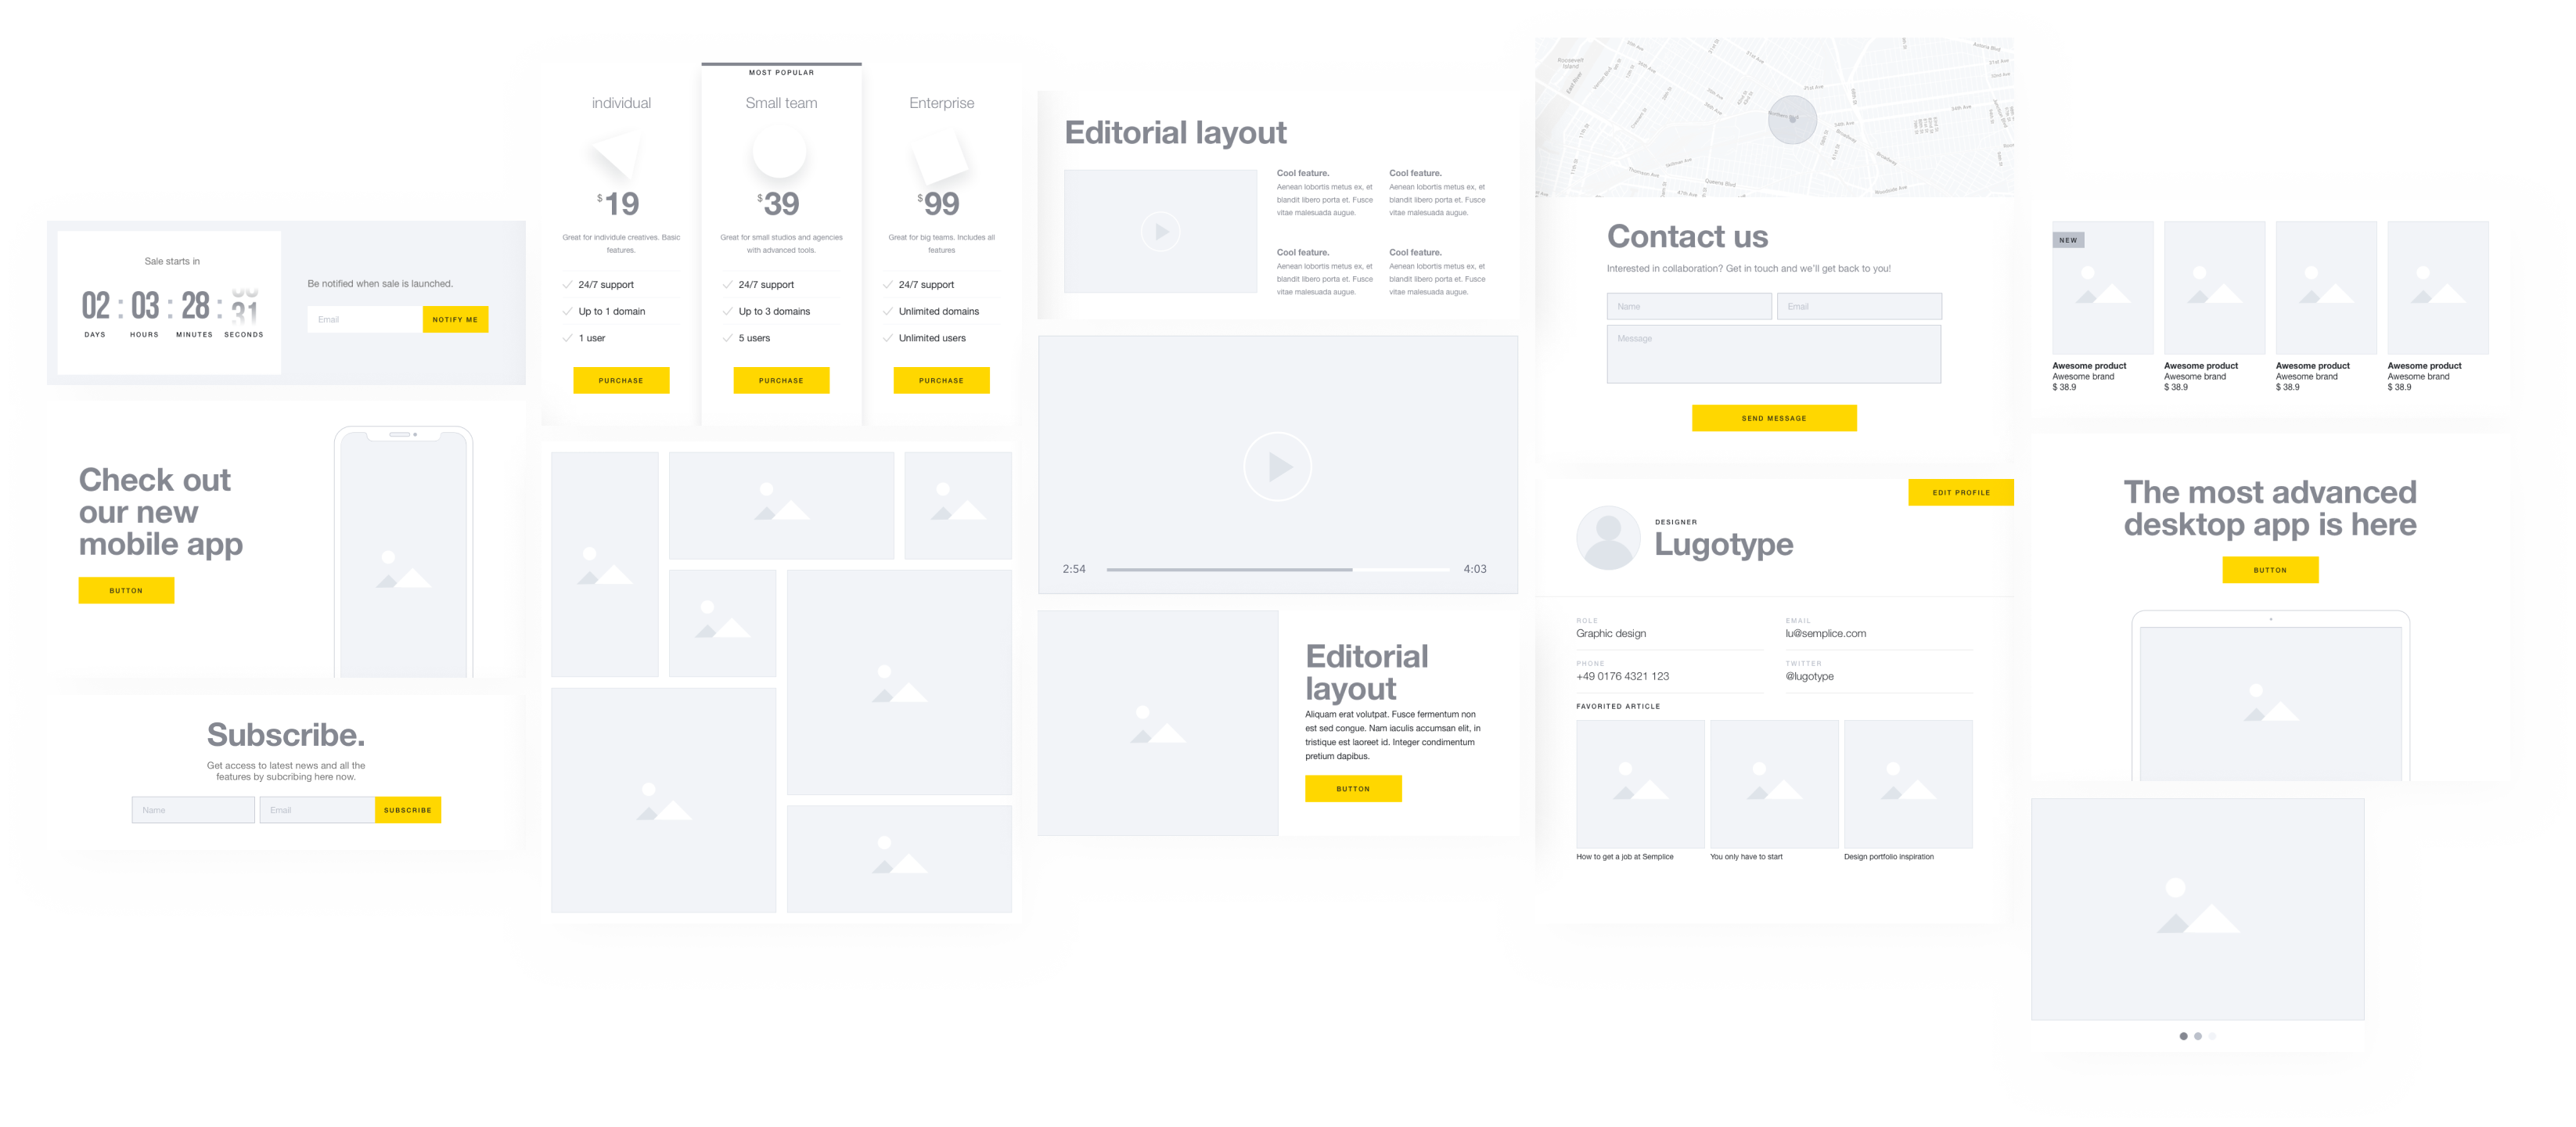 Get the best Sketch wireframe kit resources Free and Premium